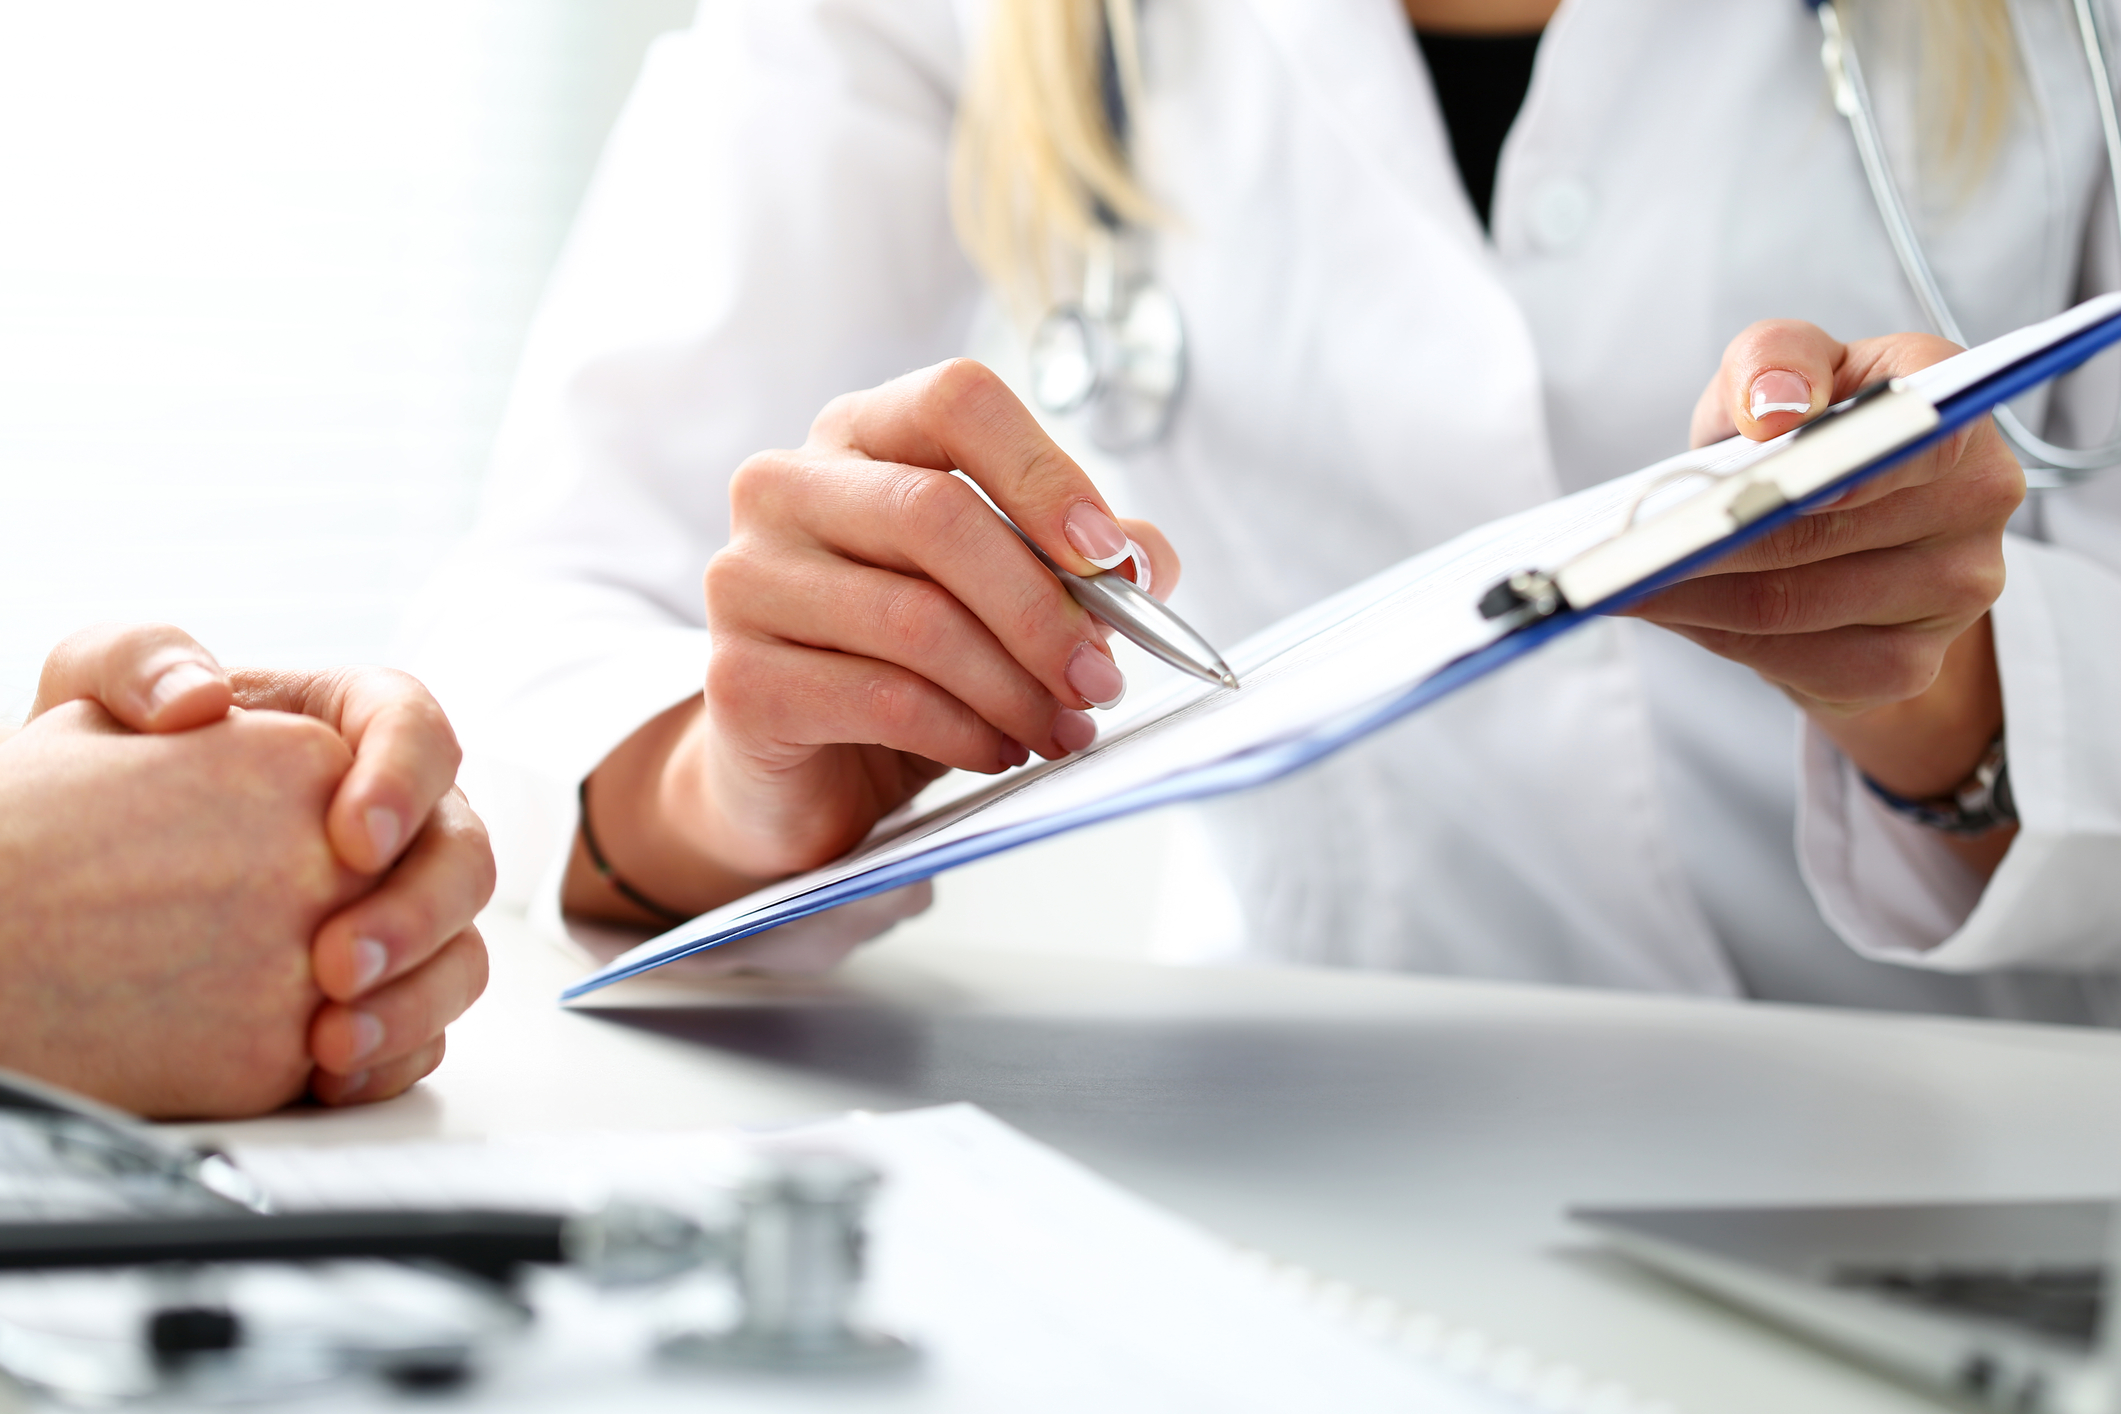 What Are the Benefits of a Concierge Doctor?